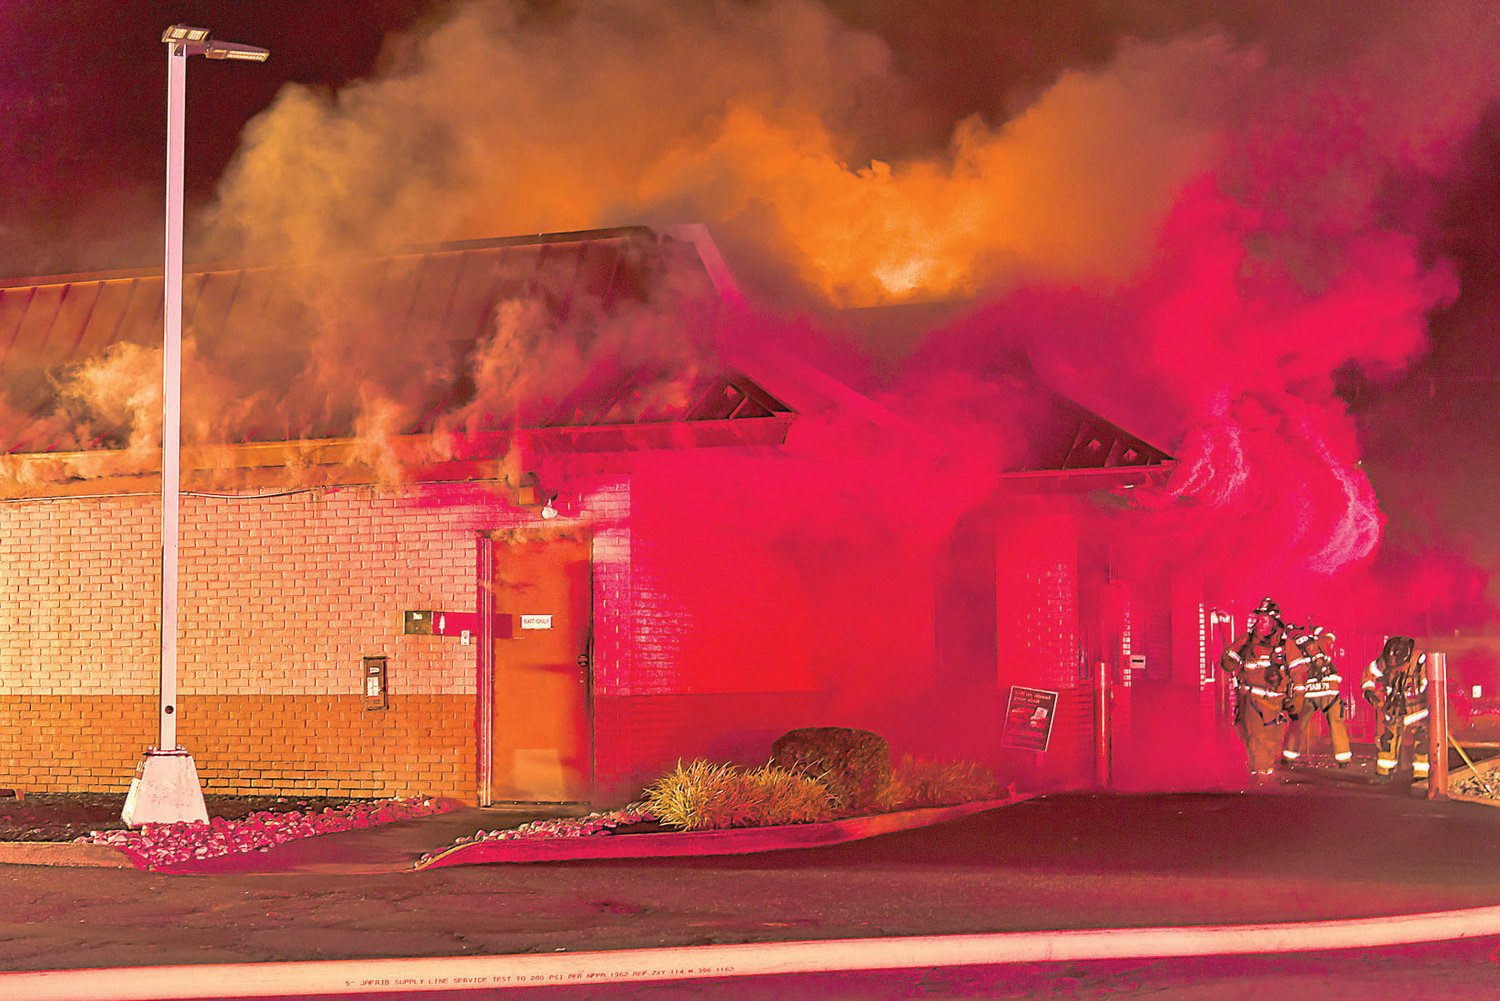 In September, fire caused the closure of McDonald’s near the intersection of Easton Road and East State Street in Doylestown. The restaurant is closed until repairs can be made. Photograph by Larry Browne.